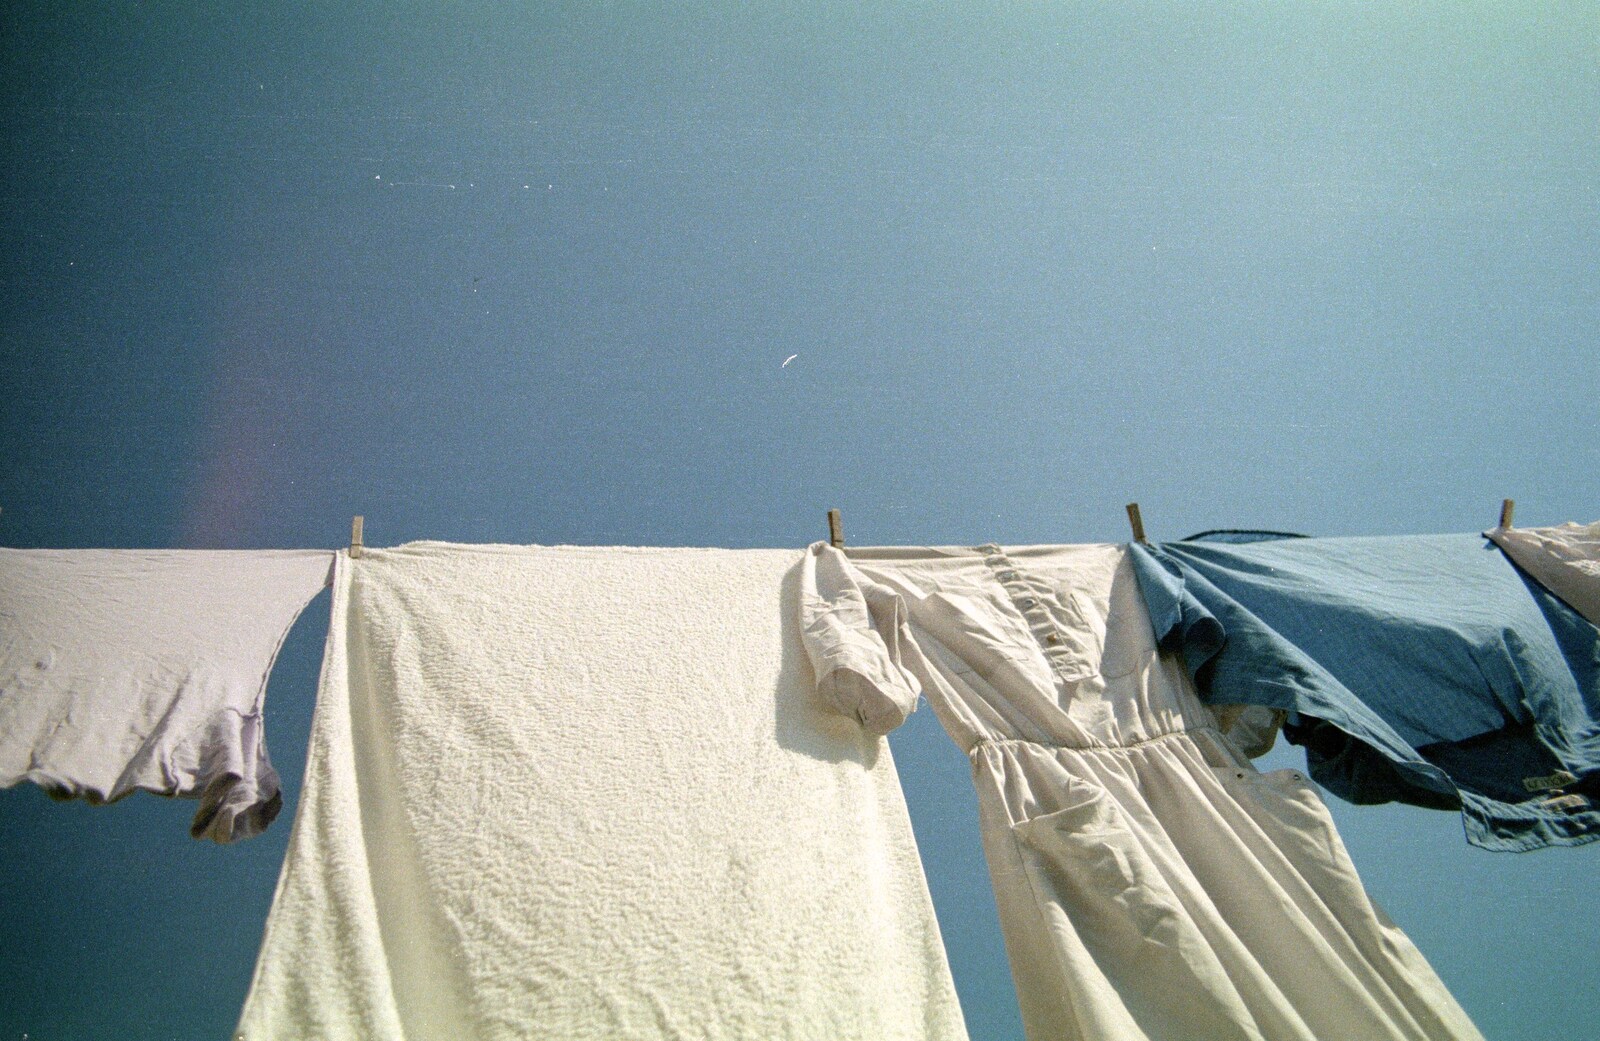 Washing on the line from Harvester Way Randomness, Lymington, Hampshire - 19th July 1986